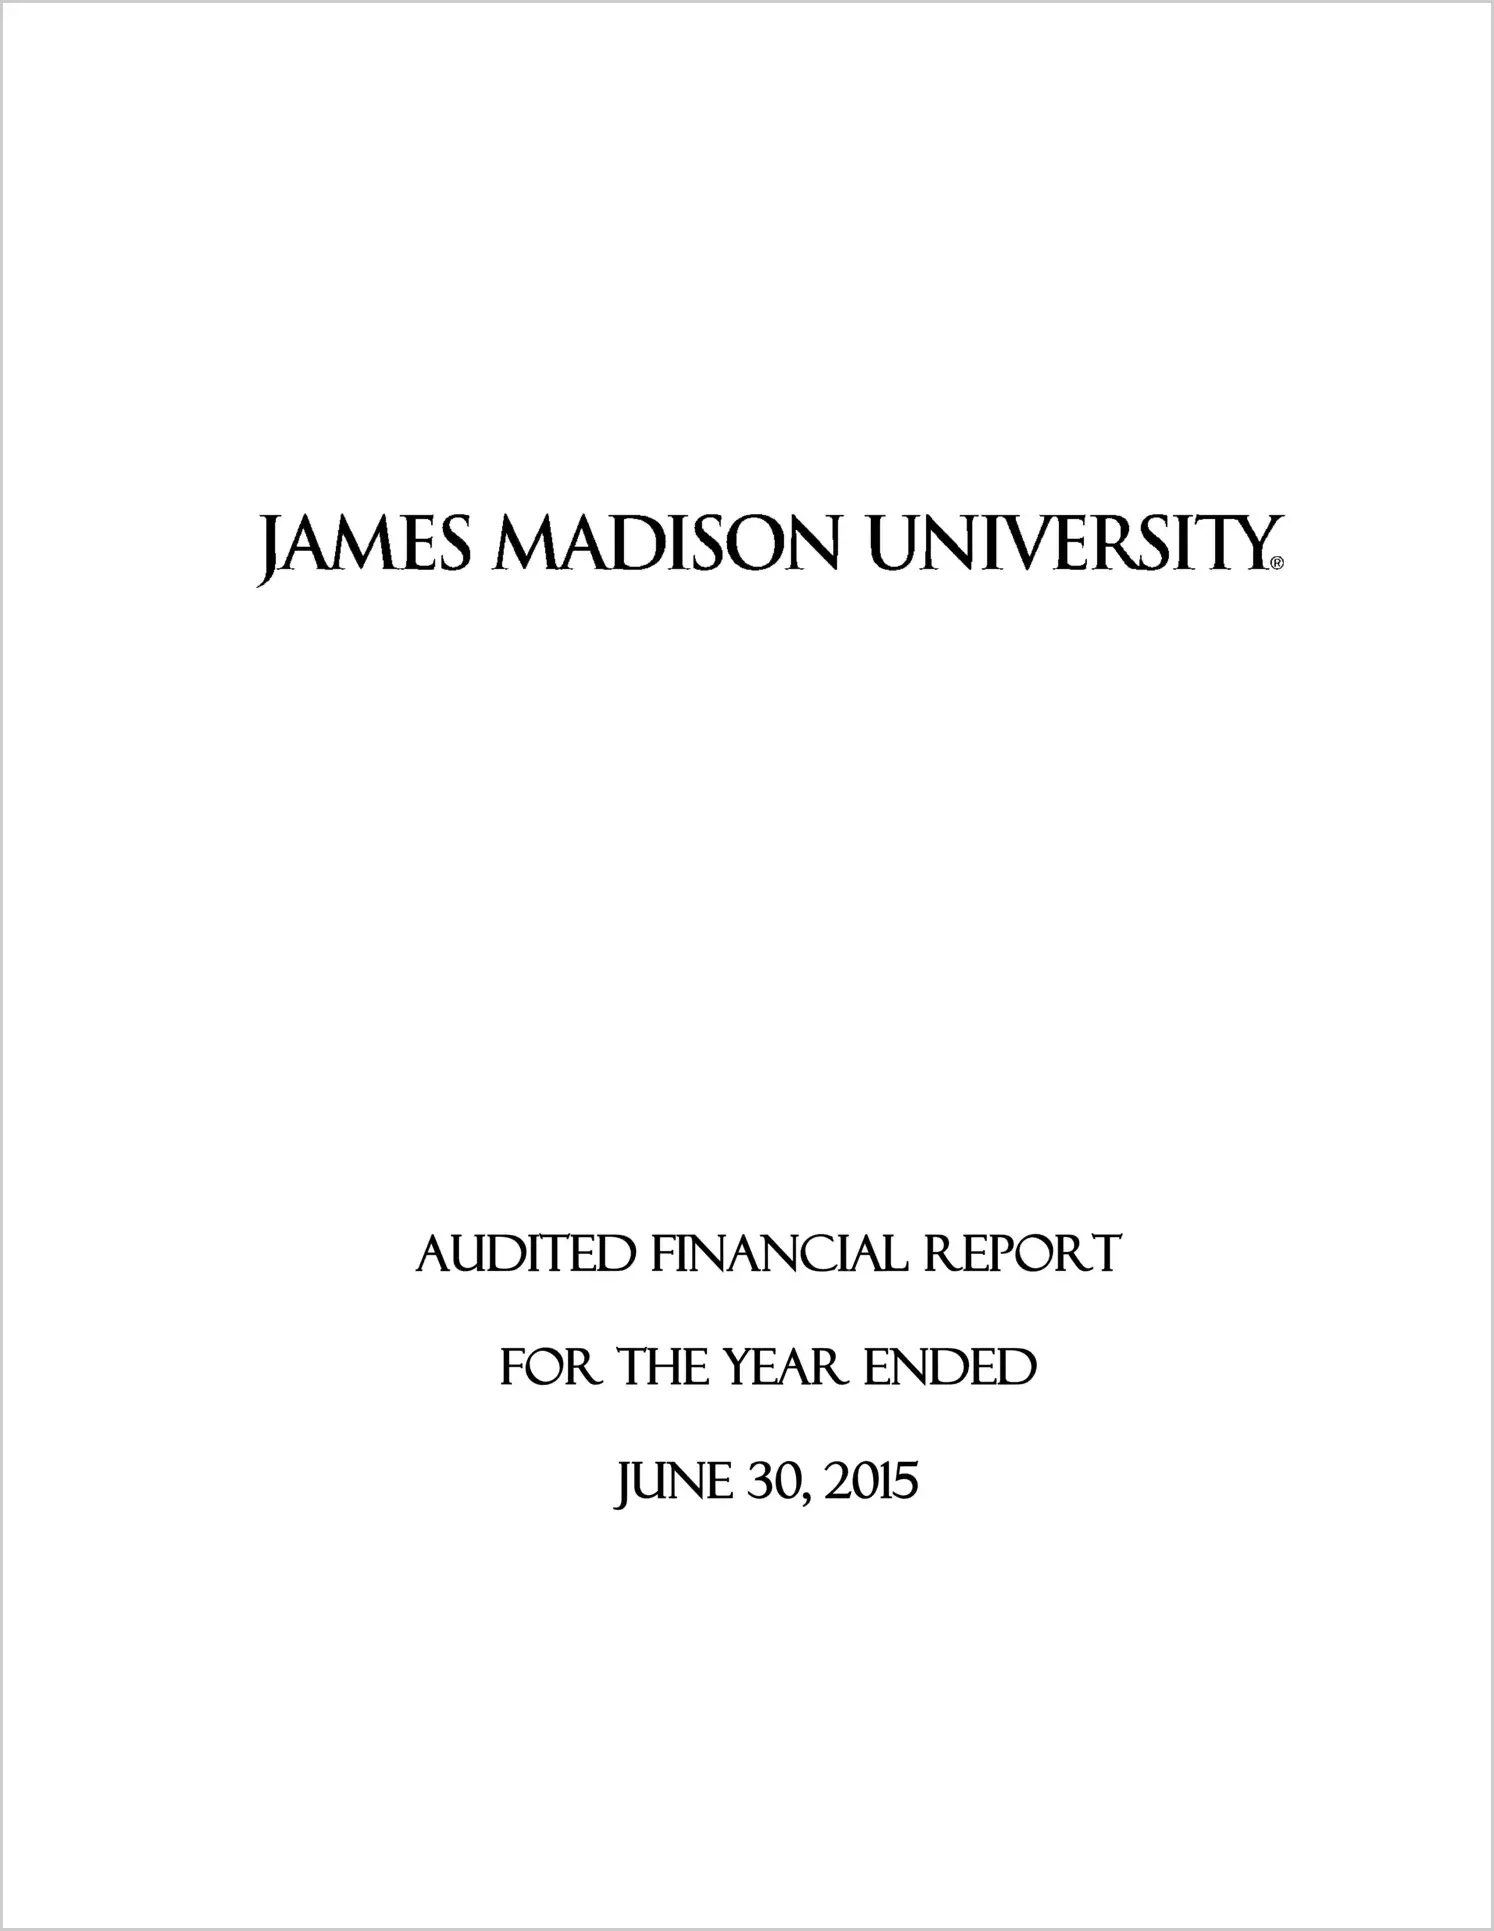 James Madison University Financial Statments for the year ended June 30, 2015